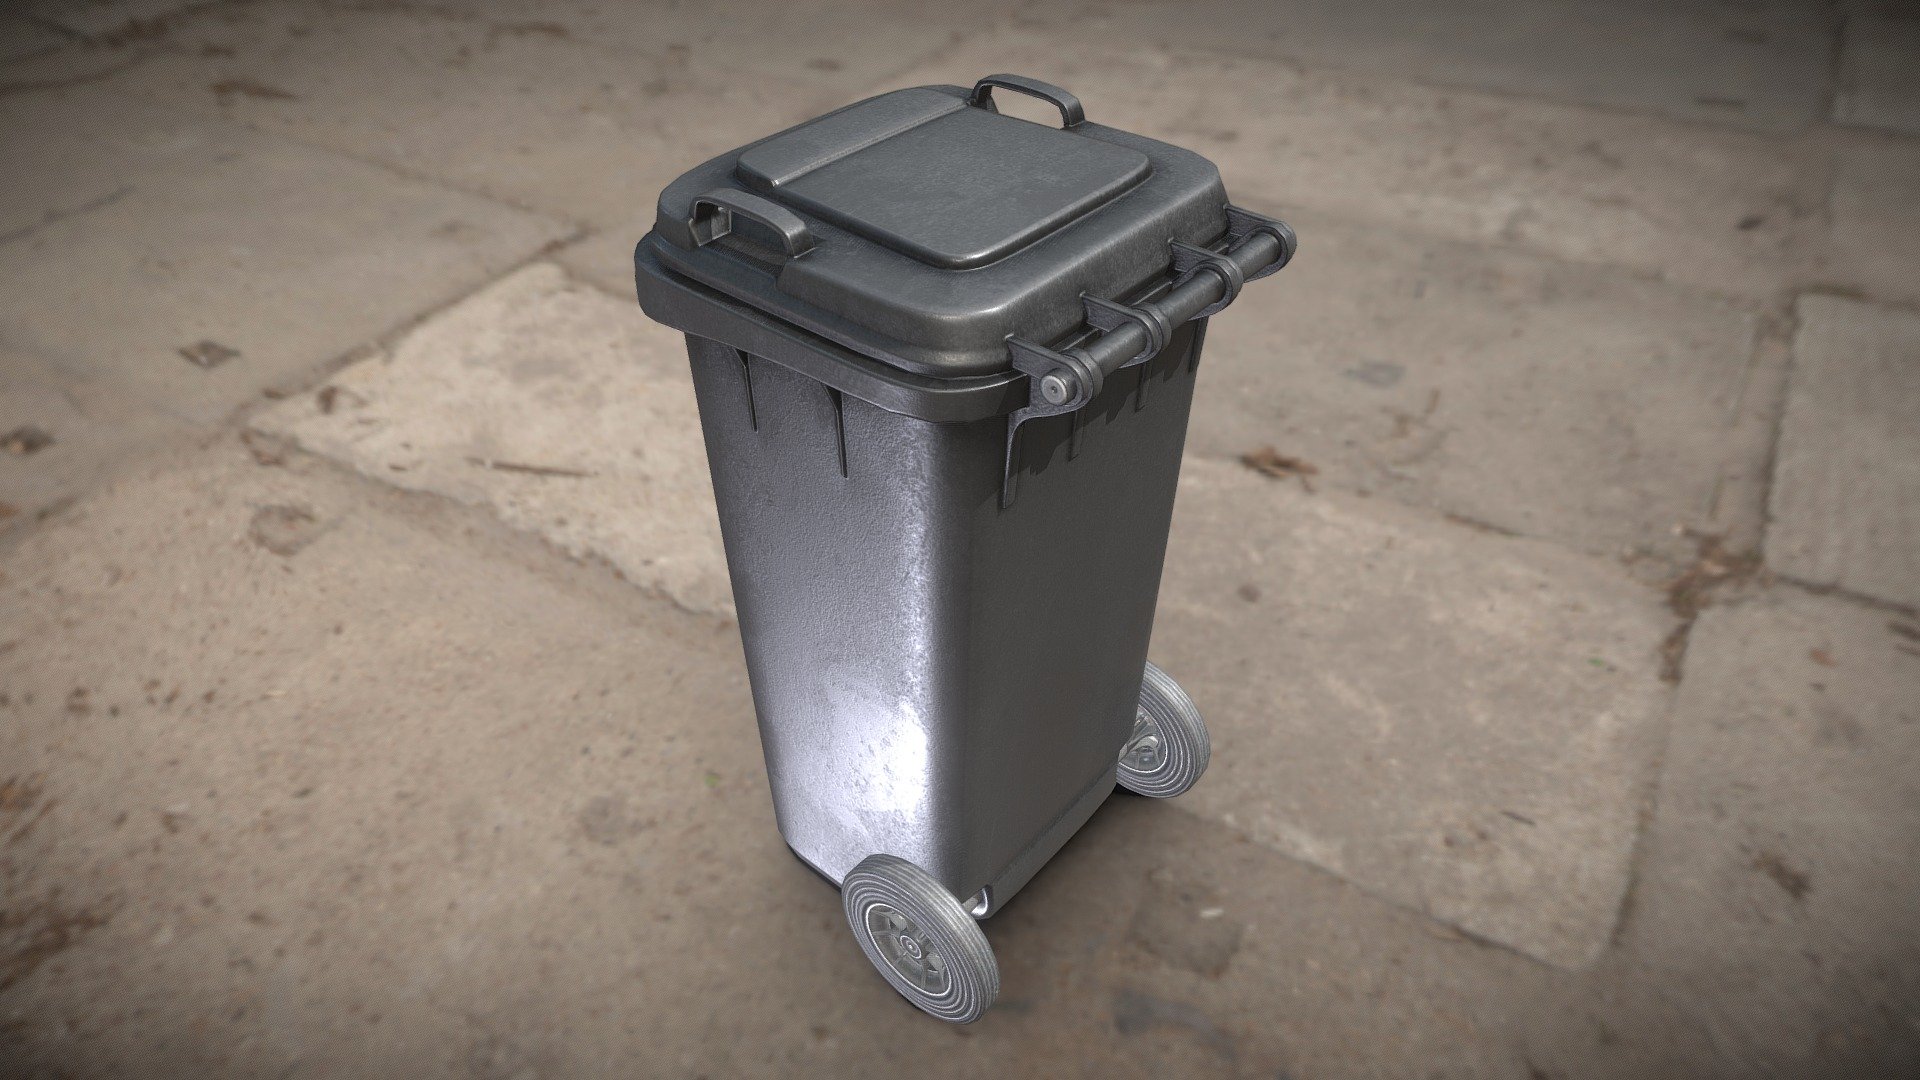 Here is the low-poly and game-ready version of the plastic waste bin in black with a filling capacity of 120 liters.




one object

object dimension 945x393x480mm

object rotation and location is 0, scale is 1.000 x 1.000 x 1.000

the origin point is on the bottom of the waste bin

one PBR material with 4k textures

texture types: Base Color, Normal, Metalness, Roughness

for the 3d-preview, here on Sketchfab, I only uploaded a glb with *.jpg image compression for all the pbr-textures.

you can find the high-quality uncompressed original (*.png) textures packed into the Blendefile which can be downloaded here as additional file.



Here you can find the rigged version of this waste bin. 
https://skfb.ly/6URKP



Modeled and textured by 3DHaupt in Blender-3D - Black Plastic Waste Bin 120 Liters 945x393x480 - Buy Royalty Free 3D model by VIS-All-3D (@VIS-All) 3d model